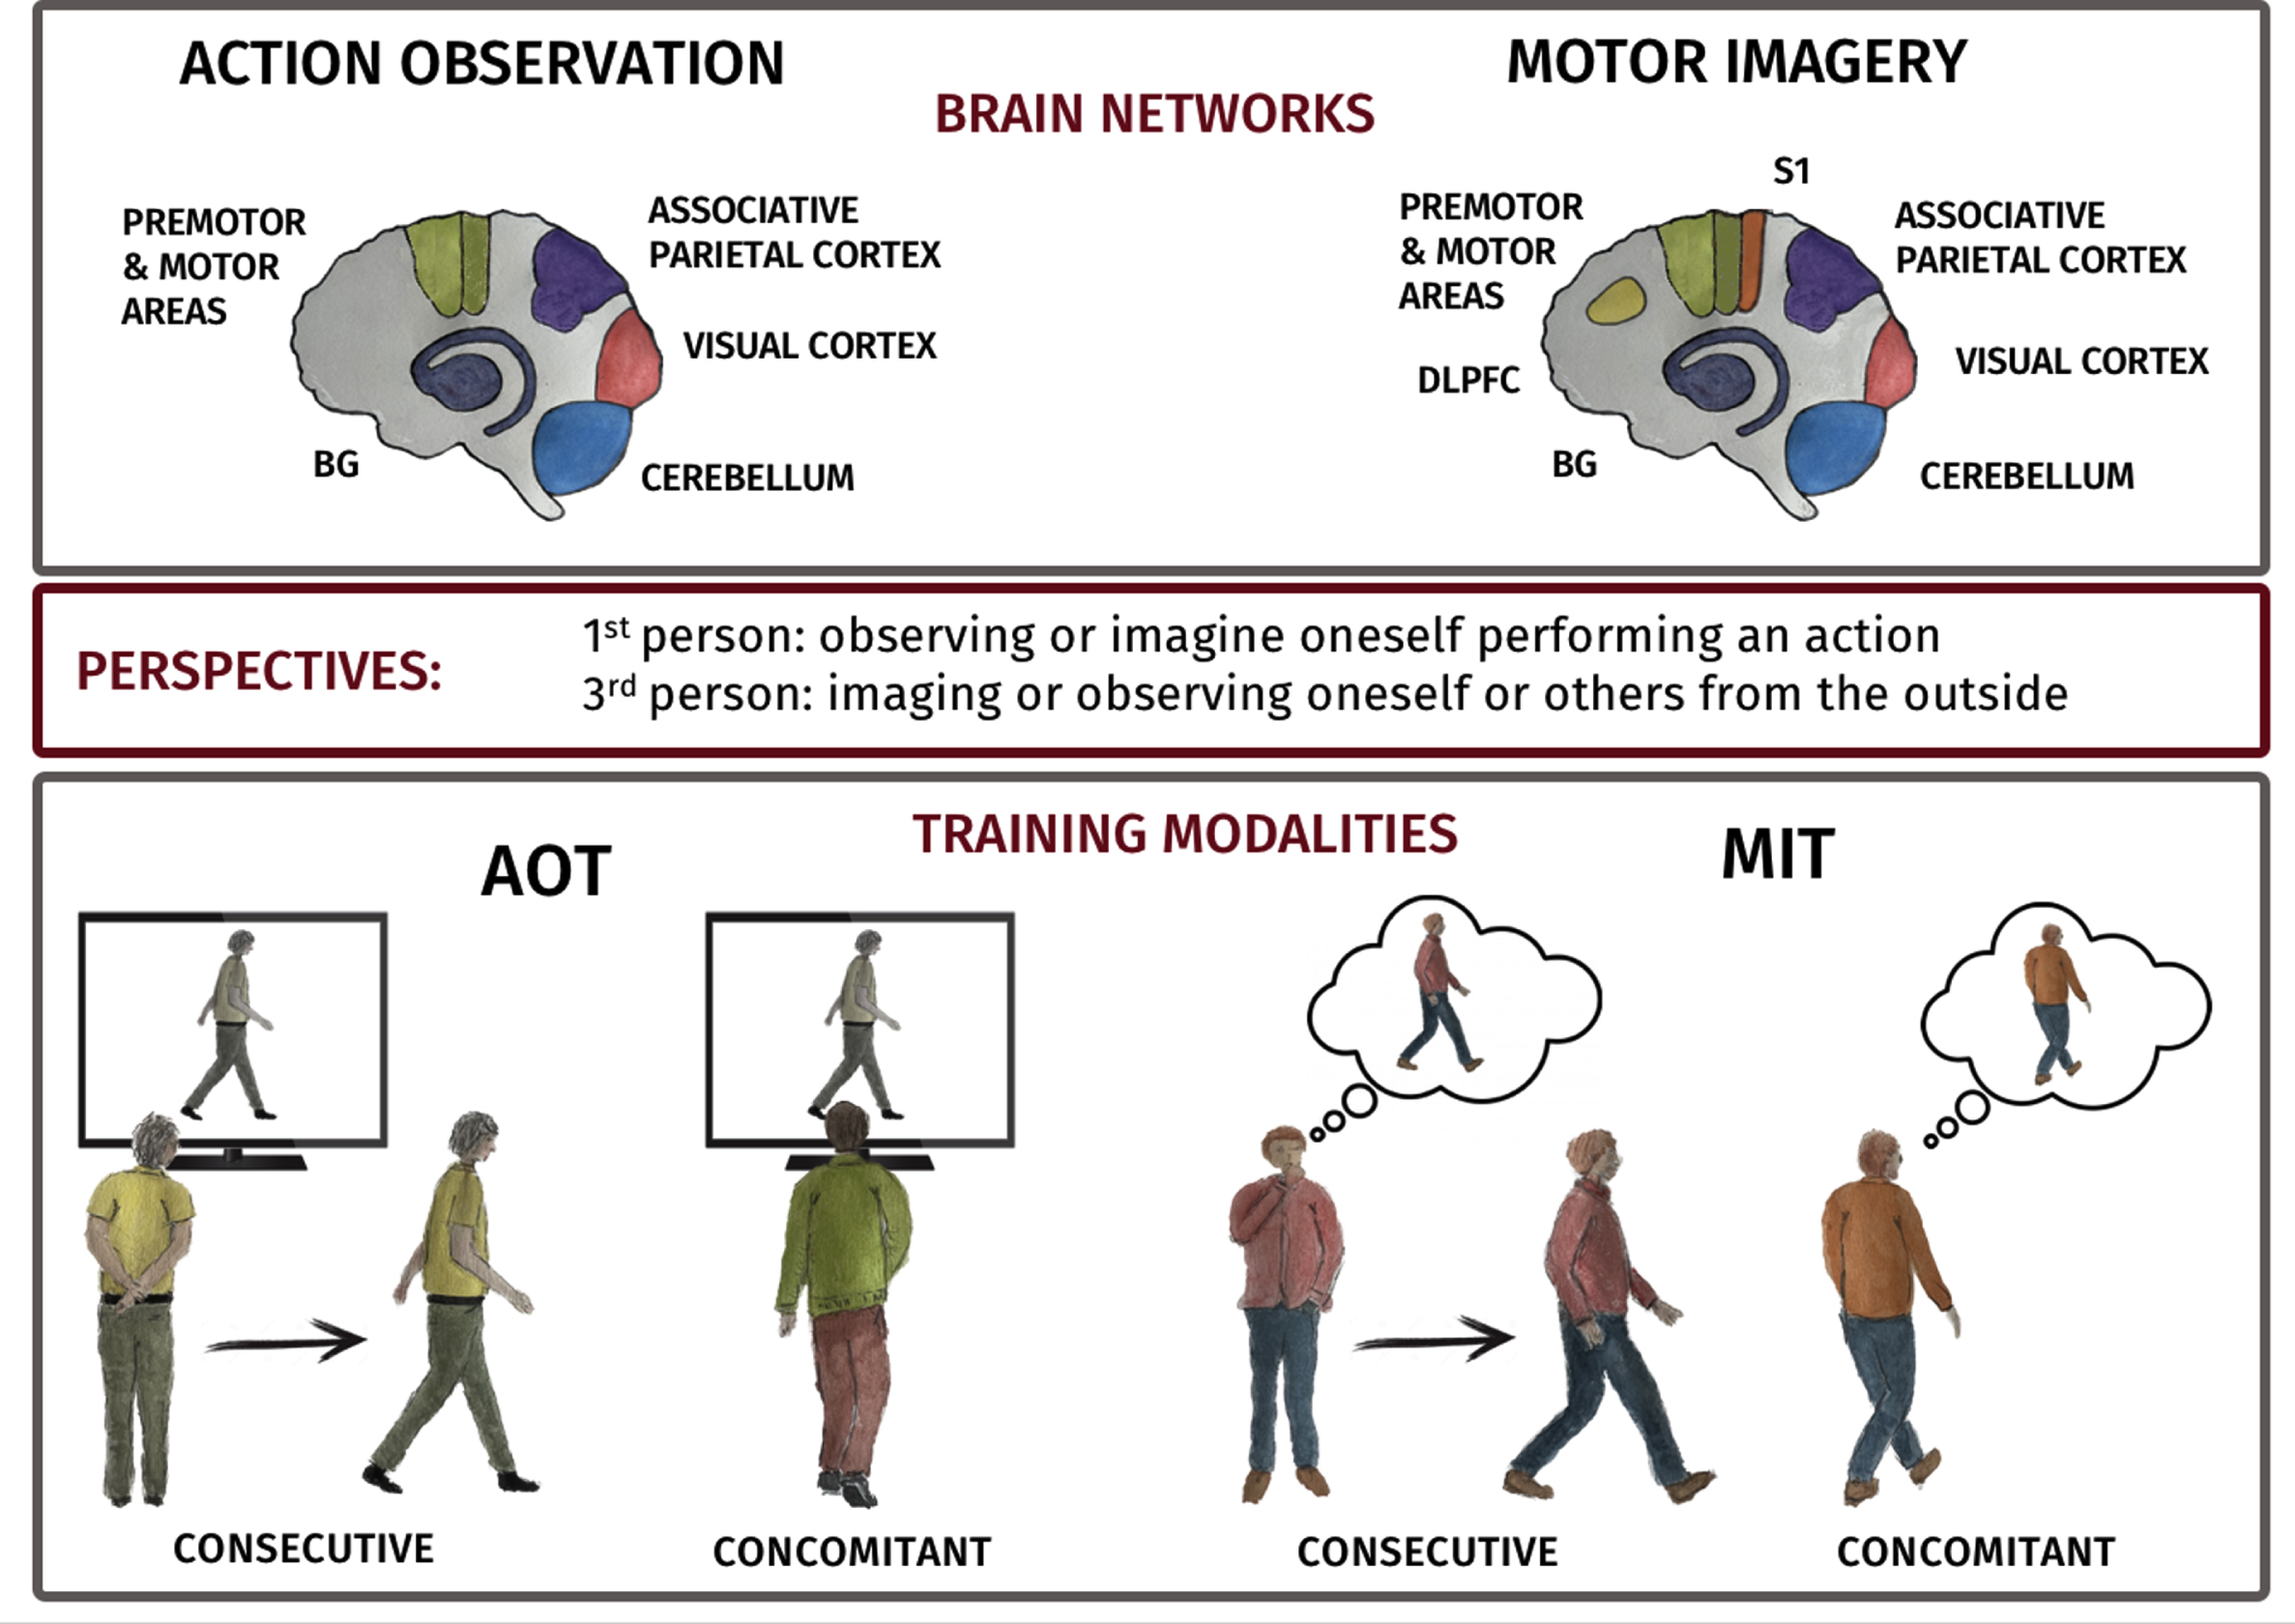 A) Depiction of AO and MI networks in human brain. AO task predominantly activates premotor and motor regions (Premotor cortex (PMC), supplementary motor area (SMA), pre-SMA and M1 (green)), parietal areas, (parietal lobule (PL) and intraparietal areas (purple)) and visual areas (red). MI task activates regions including PMC, SMA, pre-SMA and M1 (green), PL and intraparietal area (purple). Visual imagery shows activity in visual areas (red) and kinesthetic MI in the primary somatosensory area (orange). Additionally, the dorsolateral prefrontal cortex (DLPFC) is consistently recruited during Motor Imagery task (yellow). Both cerebellum (light blue) and basal ganglia (blue) are activated during AO and MI. B) Cartoon of consecutive and concurrent training modalities.